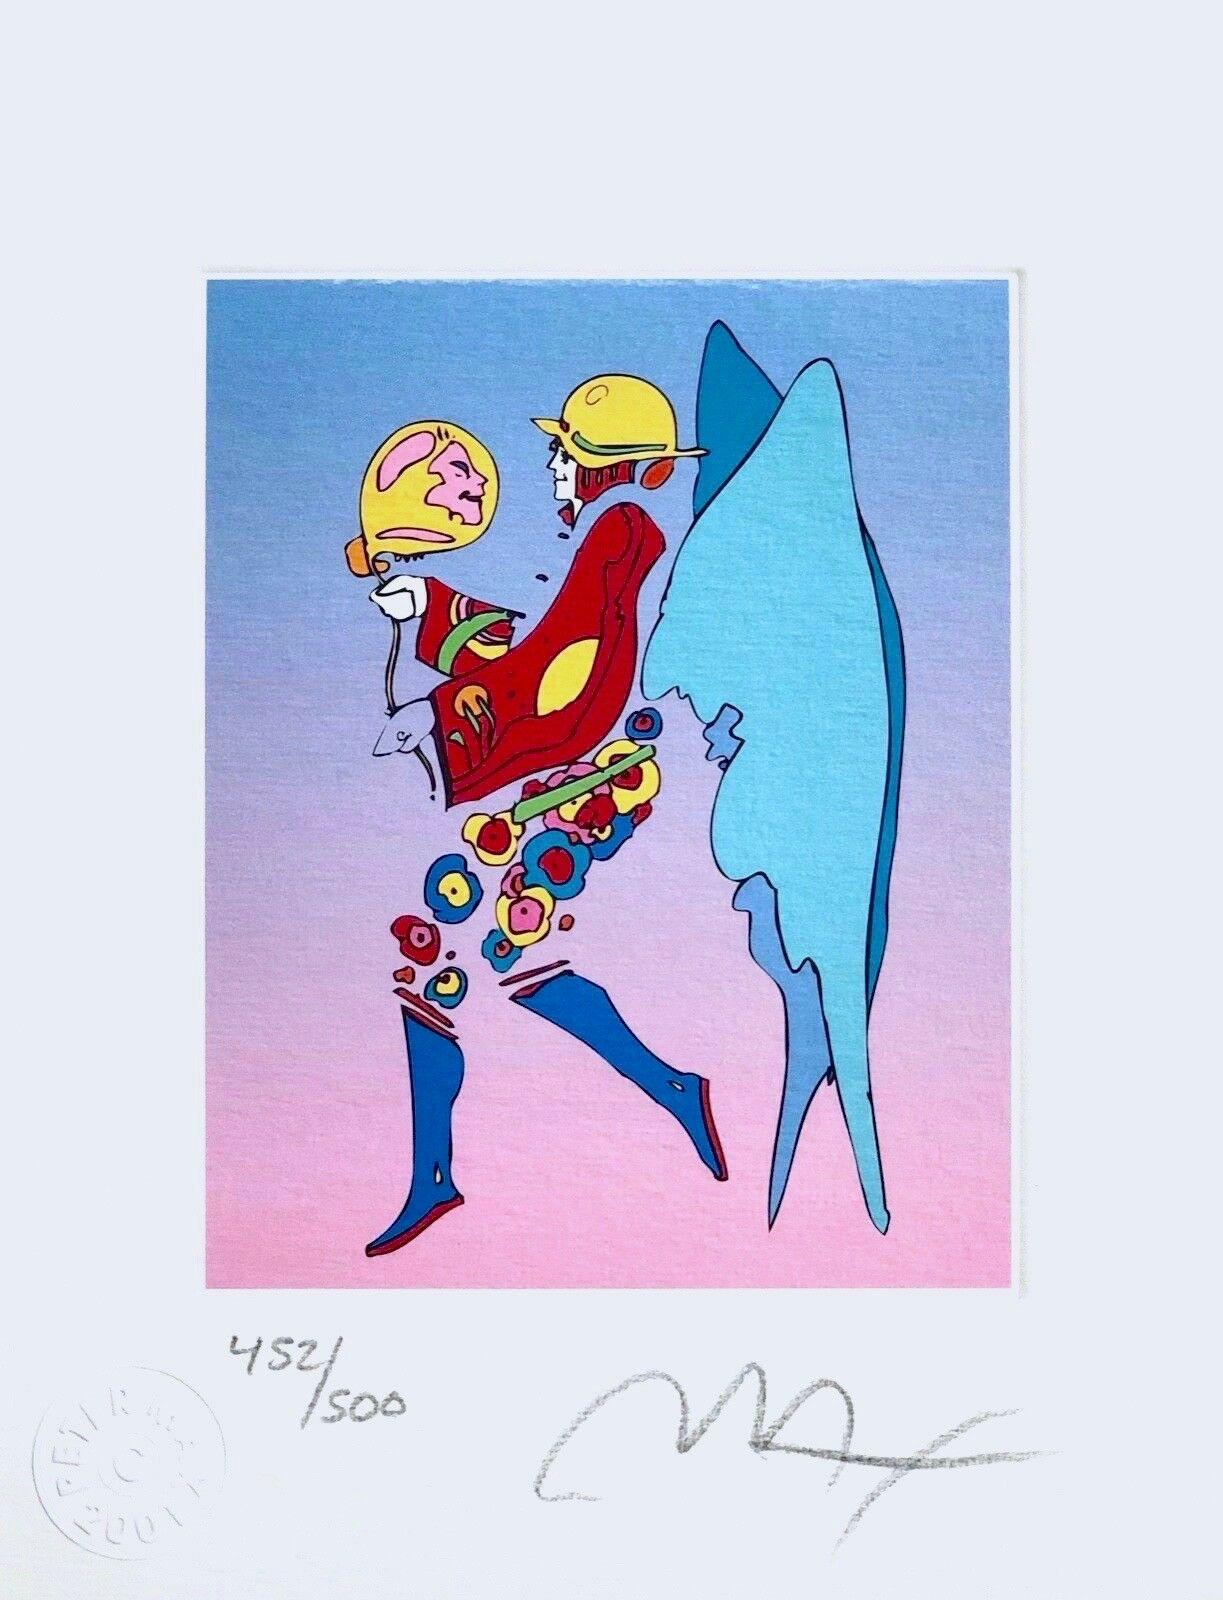 Artist: Peter Max (1937)
Title: Tip Toe Floating I
Year: 2001
Edition: 500, plus proofs
Medium: Lithograph on Lustro Saxony paper
Size: 6 x 4.75 inches
Condition: Excellent
Inscription: Signed and numbered by the artist.
Notes: Published by Via